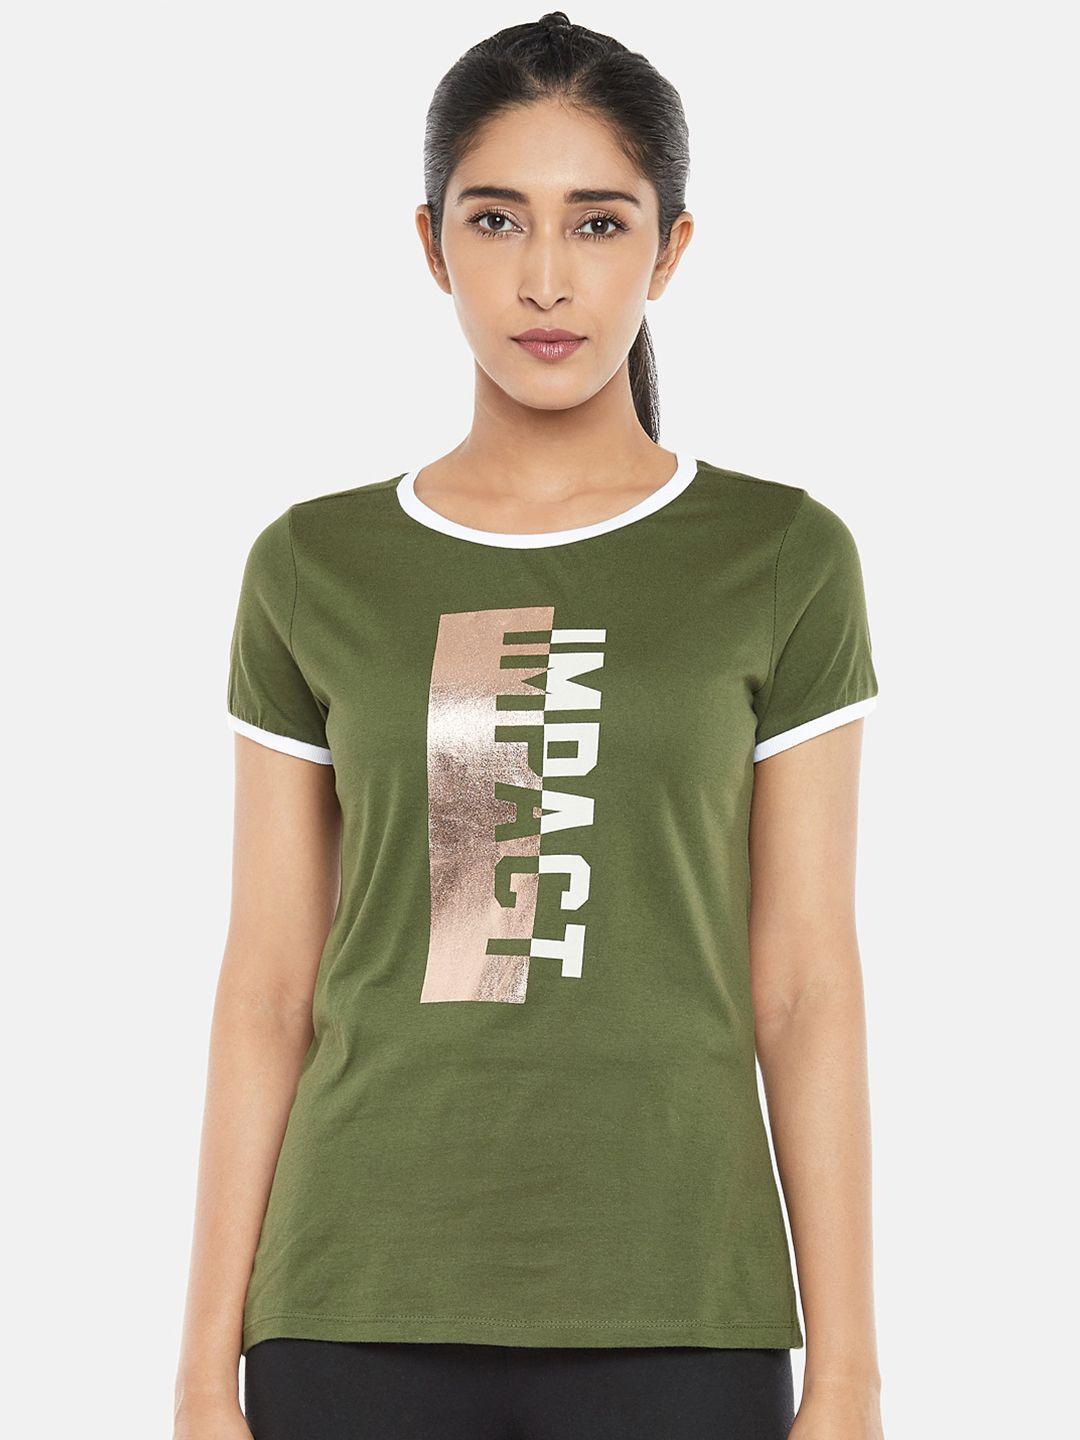 ajile by pantaloons women olive green & white typography printed t-shirt